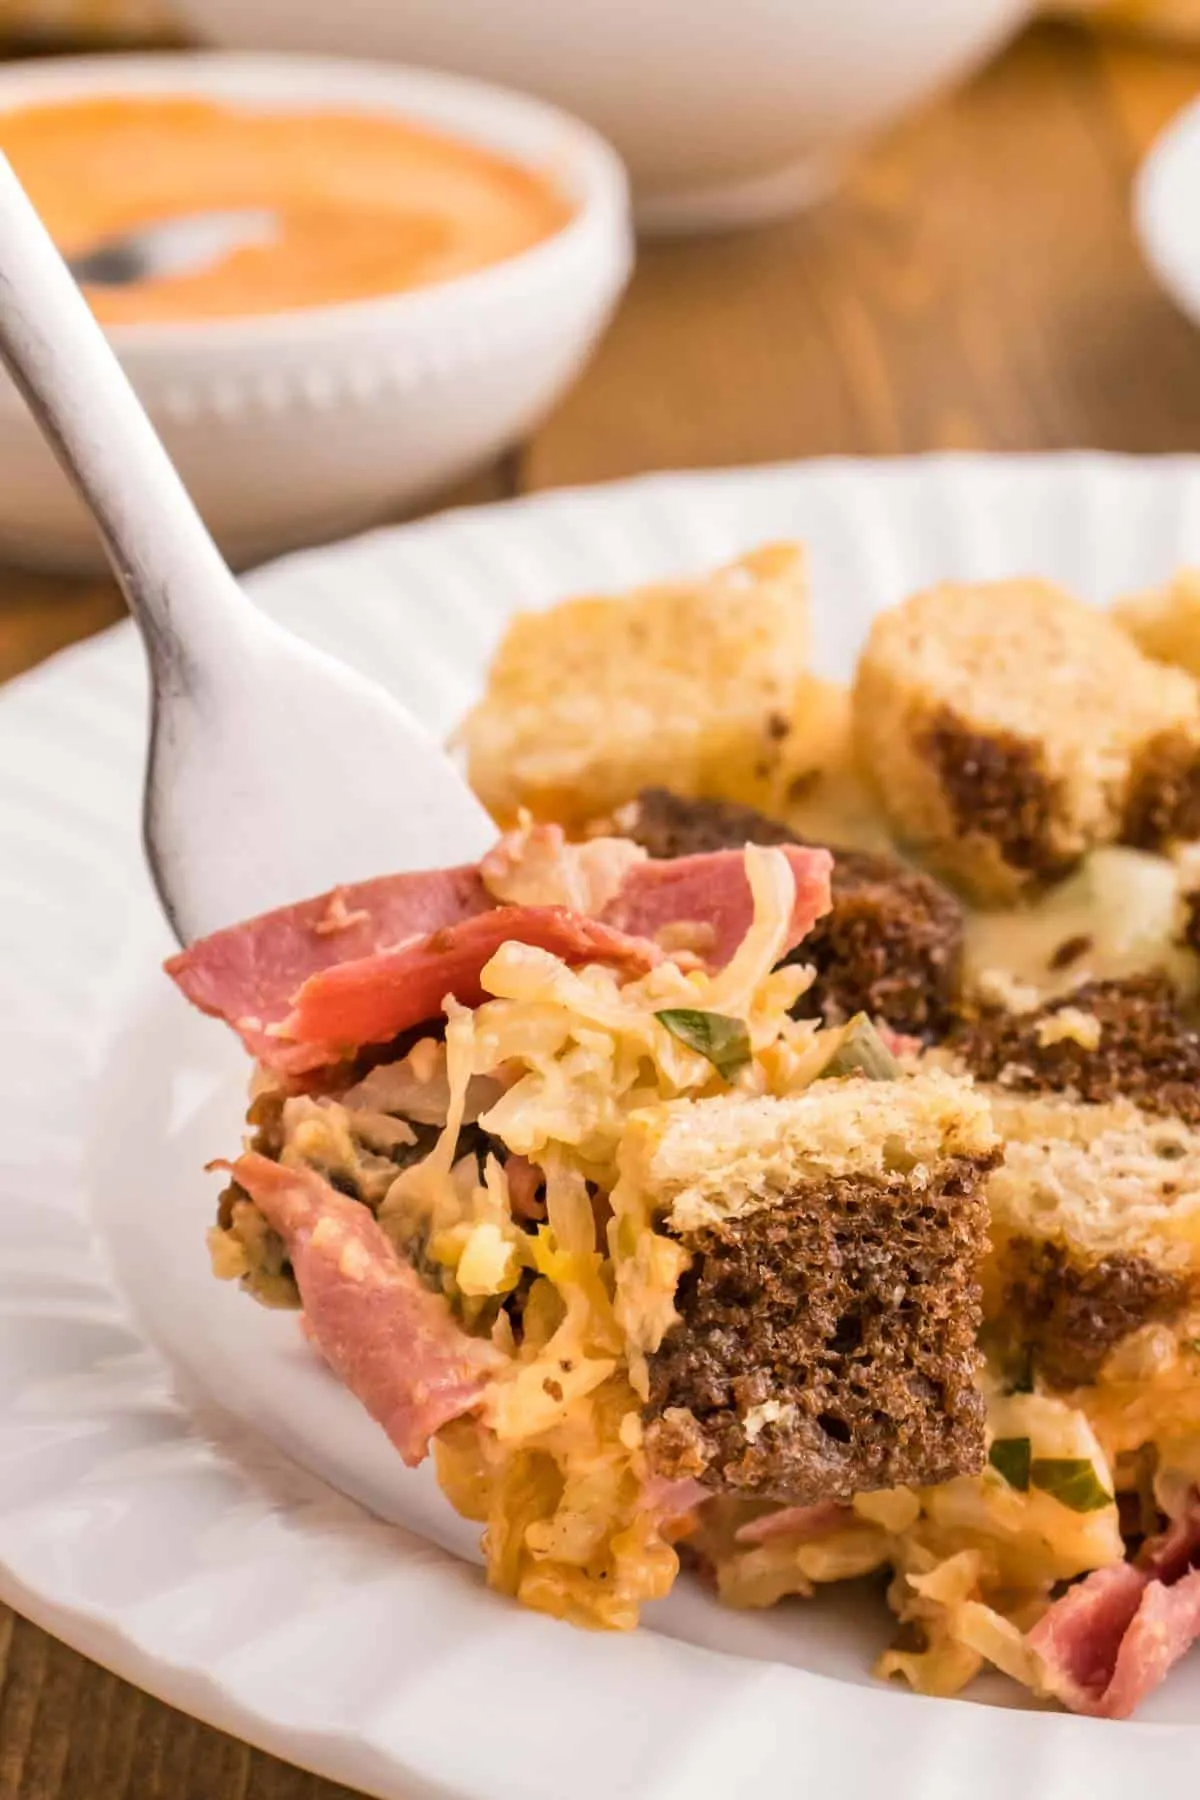 Reuben Casserole is a tasty dish loaded with cubes of rye bread, sliced corned beef, sauerkraut, dill pickles, Swiss cheese and Thousand Island dressing.